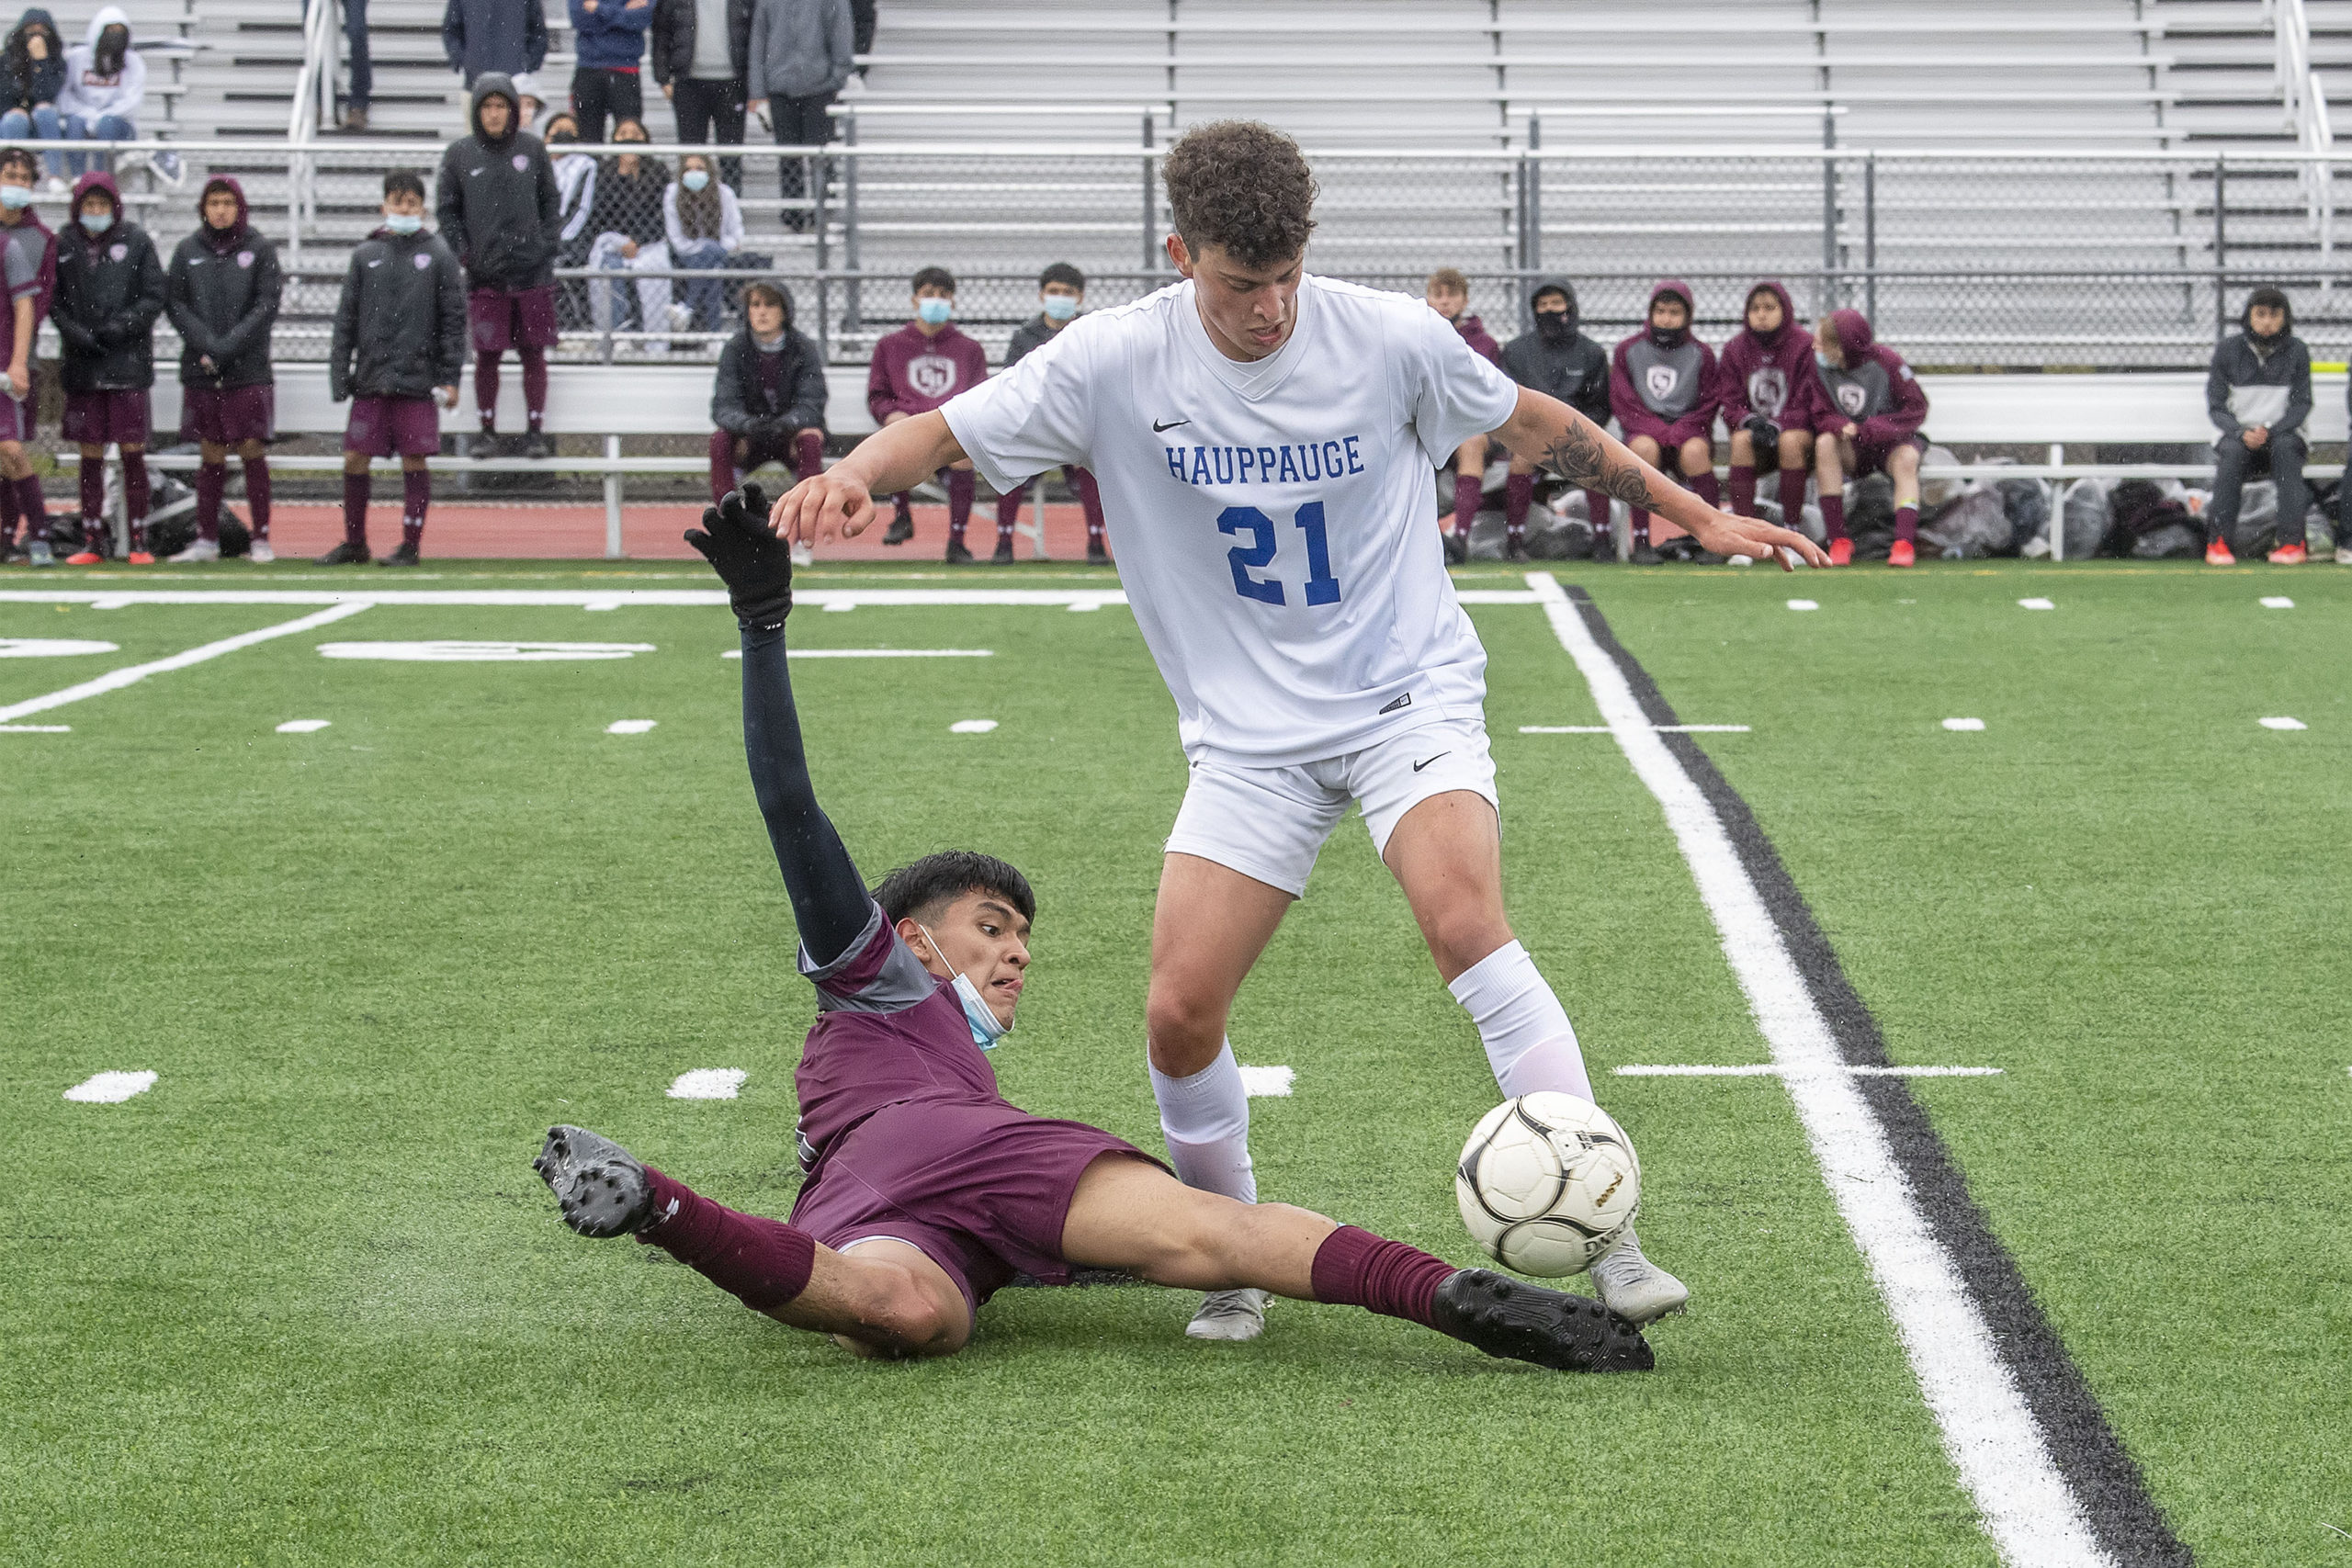 An East Hampton player tries to play the ball while falling down.